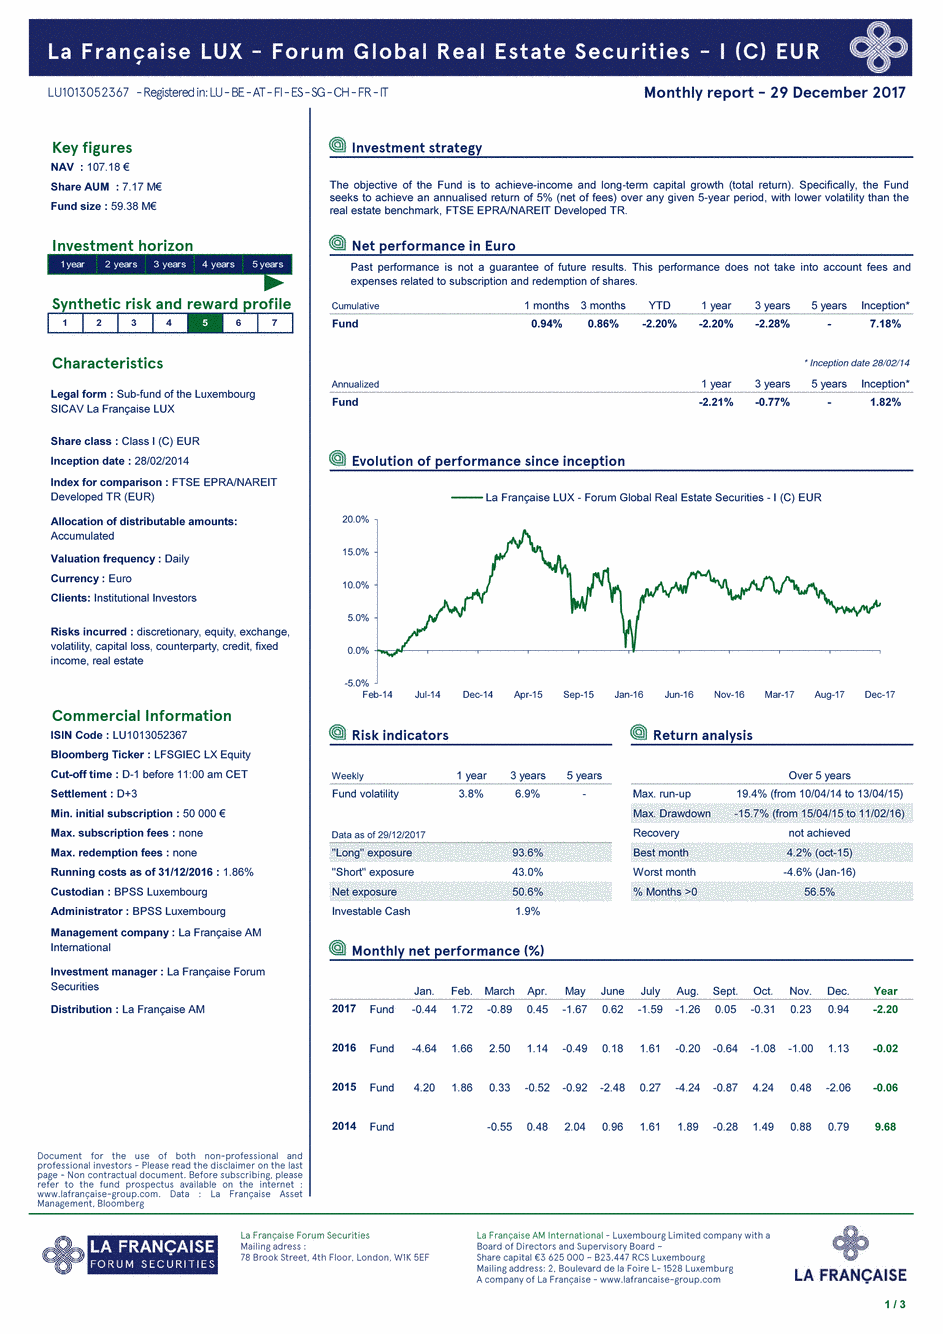 Reporting La Française LUX - Forum Global Real Estate Securities - I (C) EUR - 31/12/2017 - Anglais